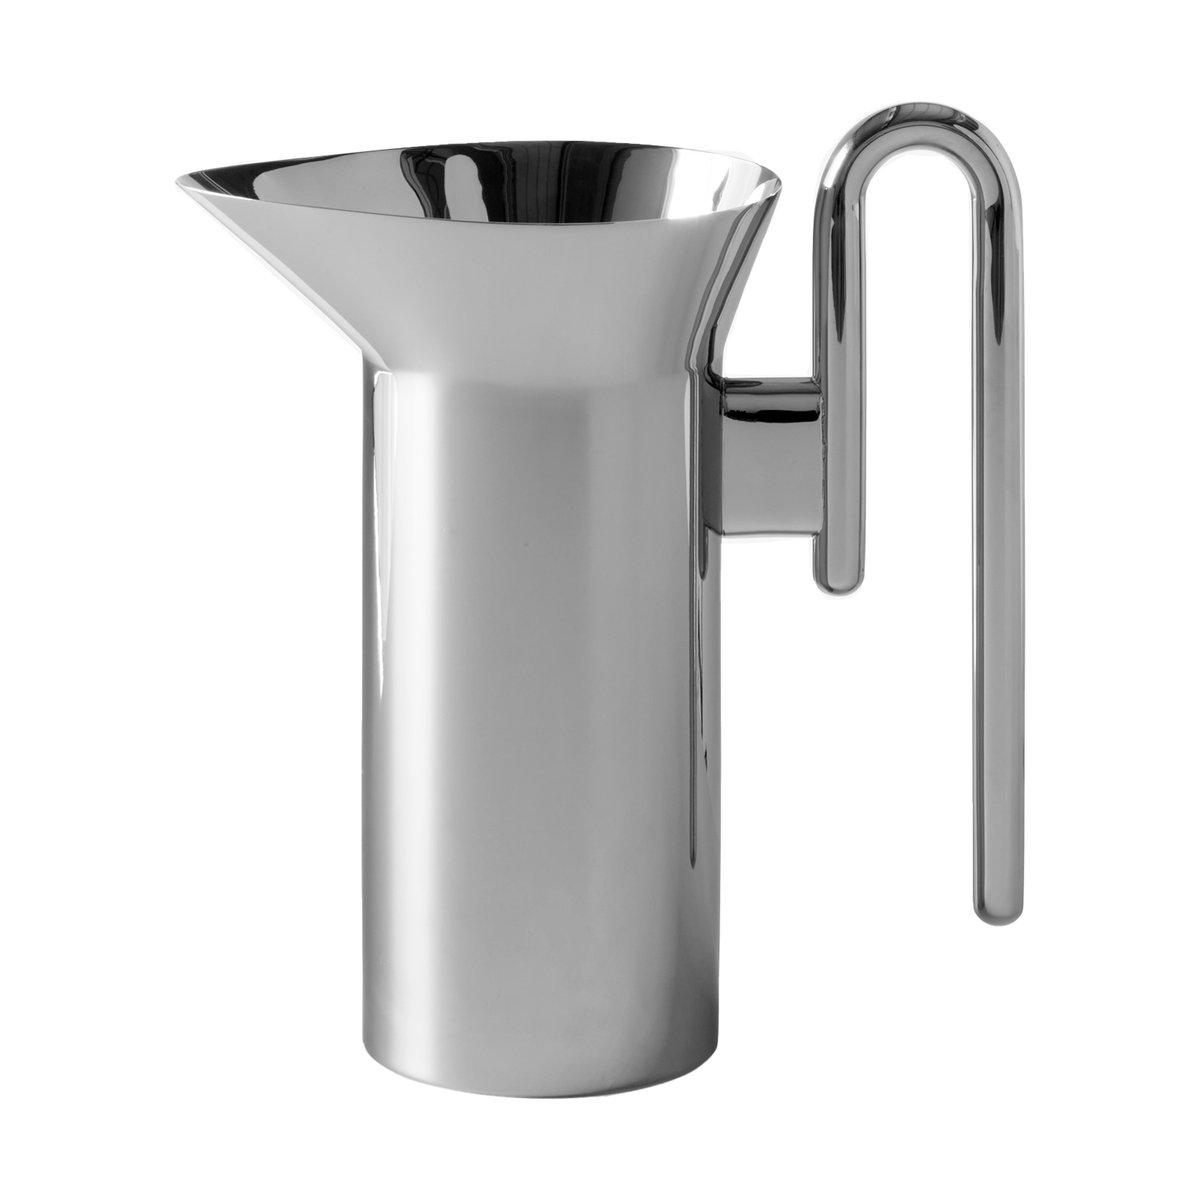 &tradition momento jh38 carafe 1 liter polished steel